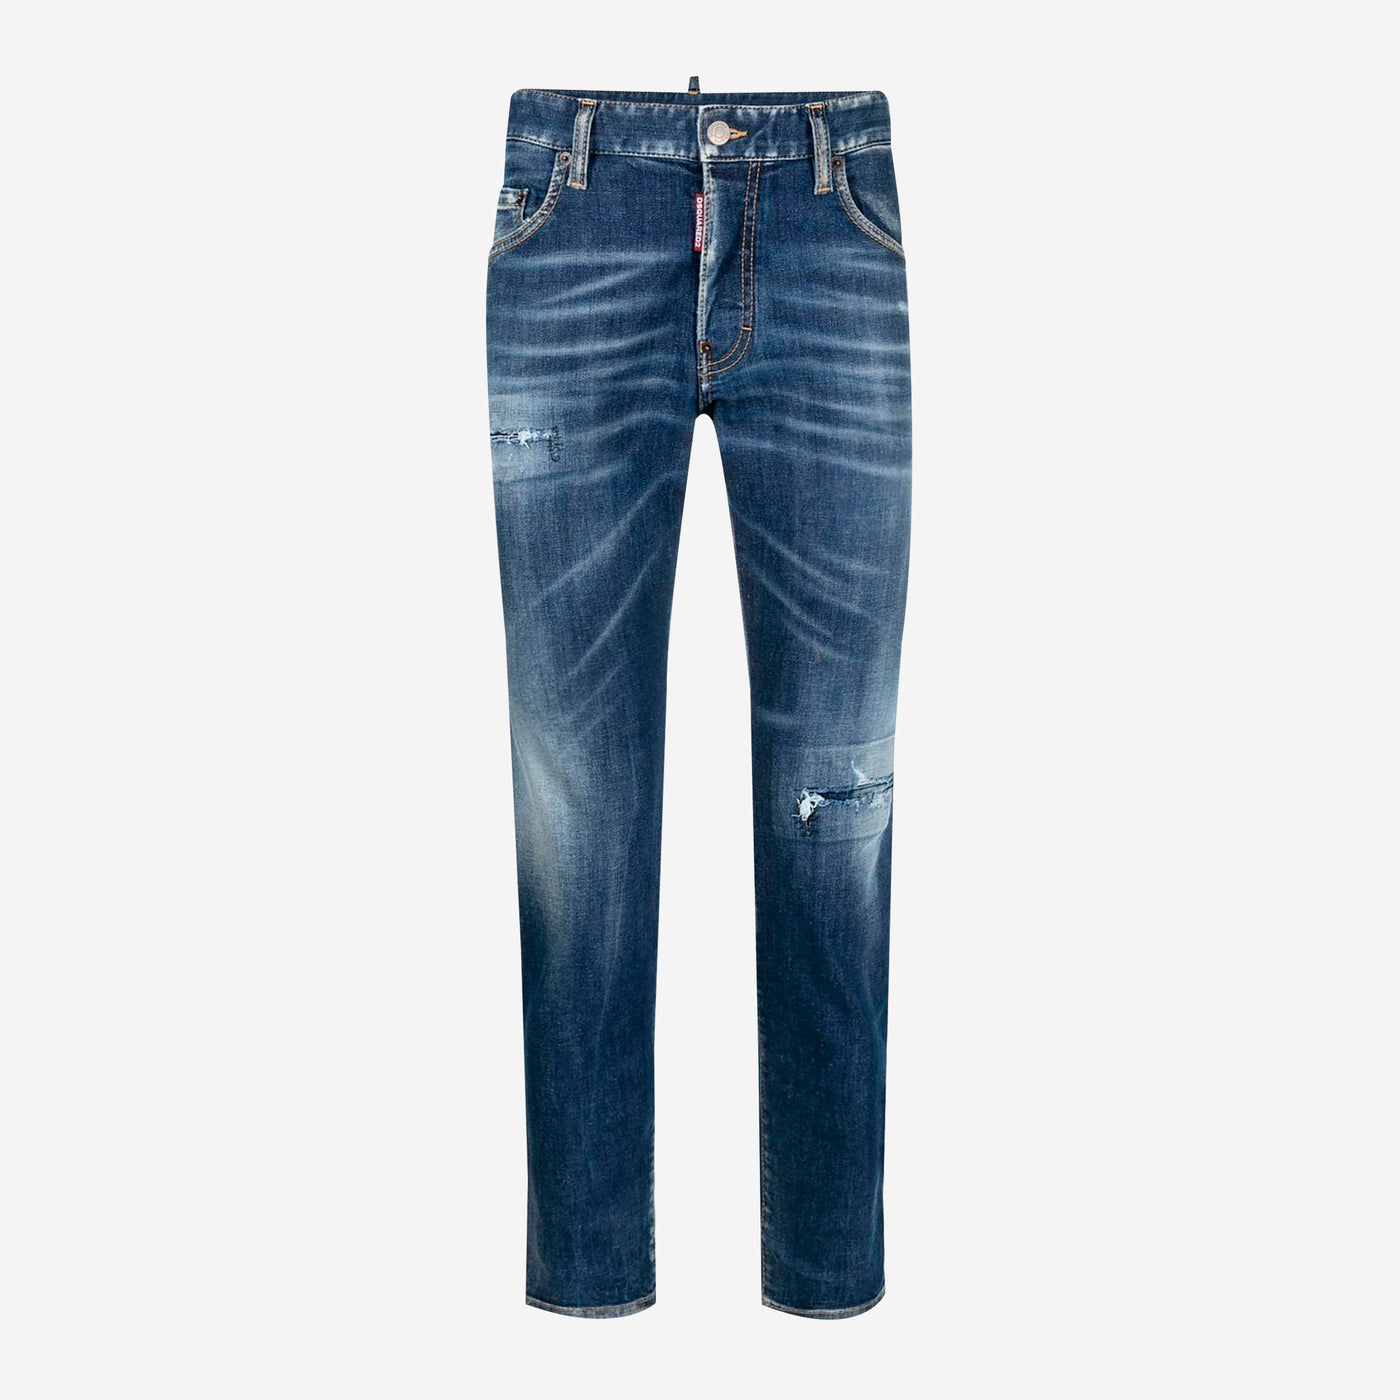 DSquared2 ICON Skater Jeans